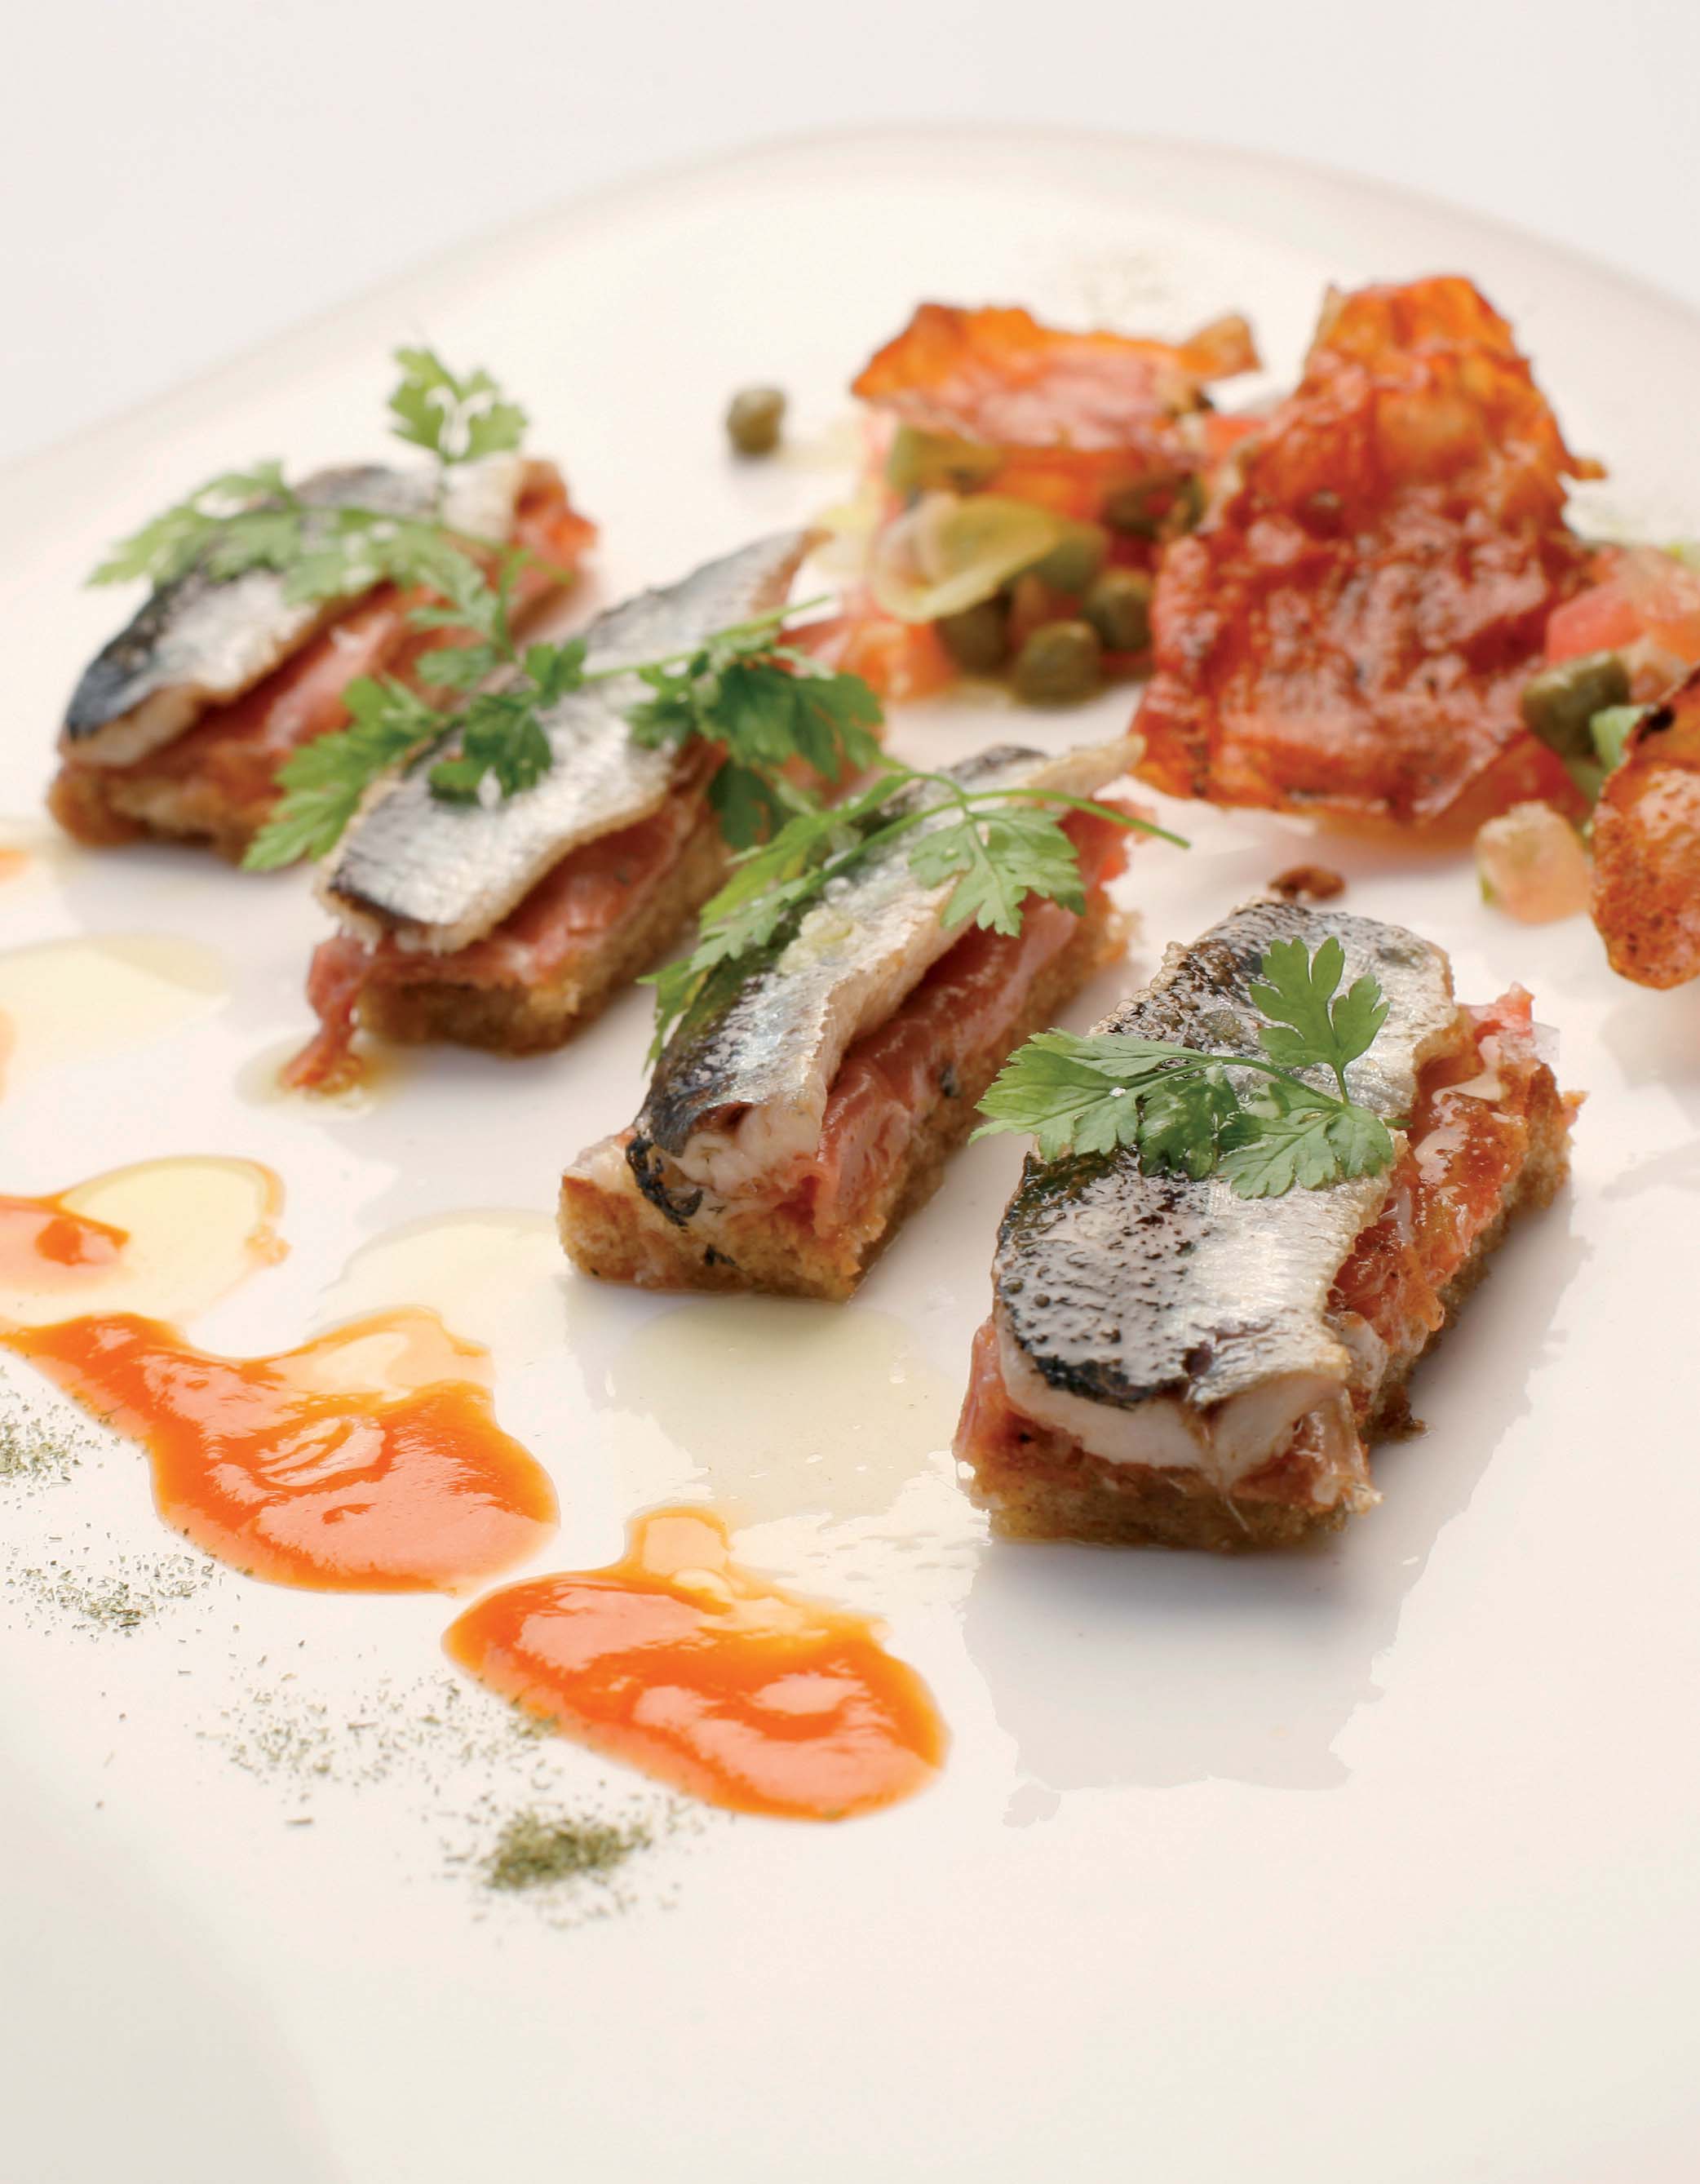 Pa amb oli with sardines and Mallorcan olive oil - Recipes - Gastronomy - Balearic Islands - Agrifoodstuffs, designations of origin and Balearic gastronomy